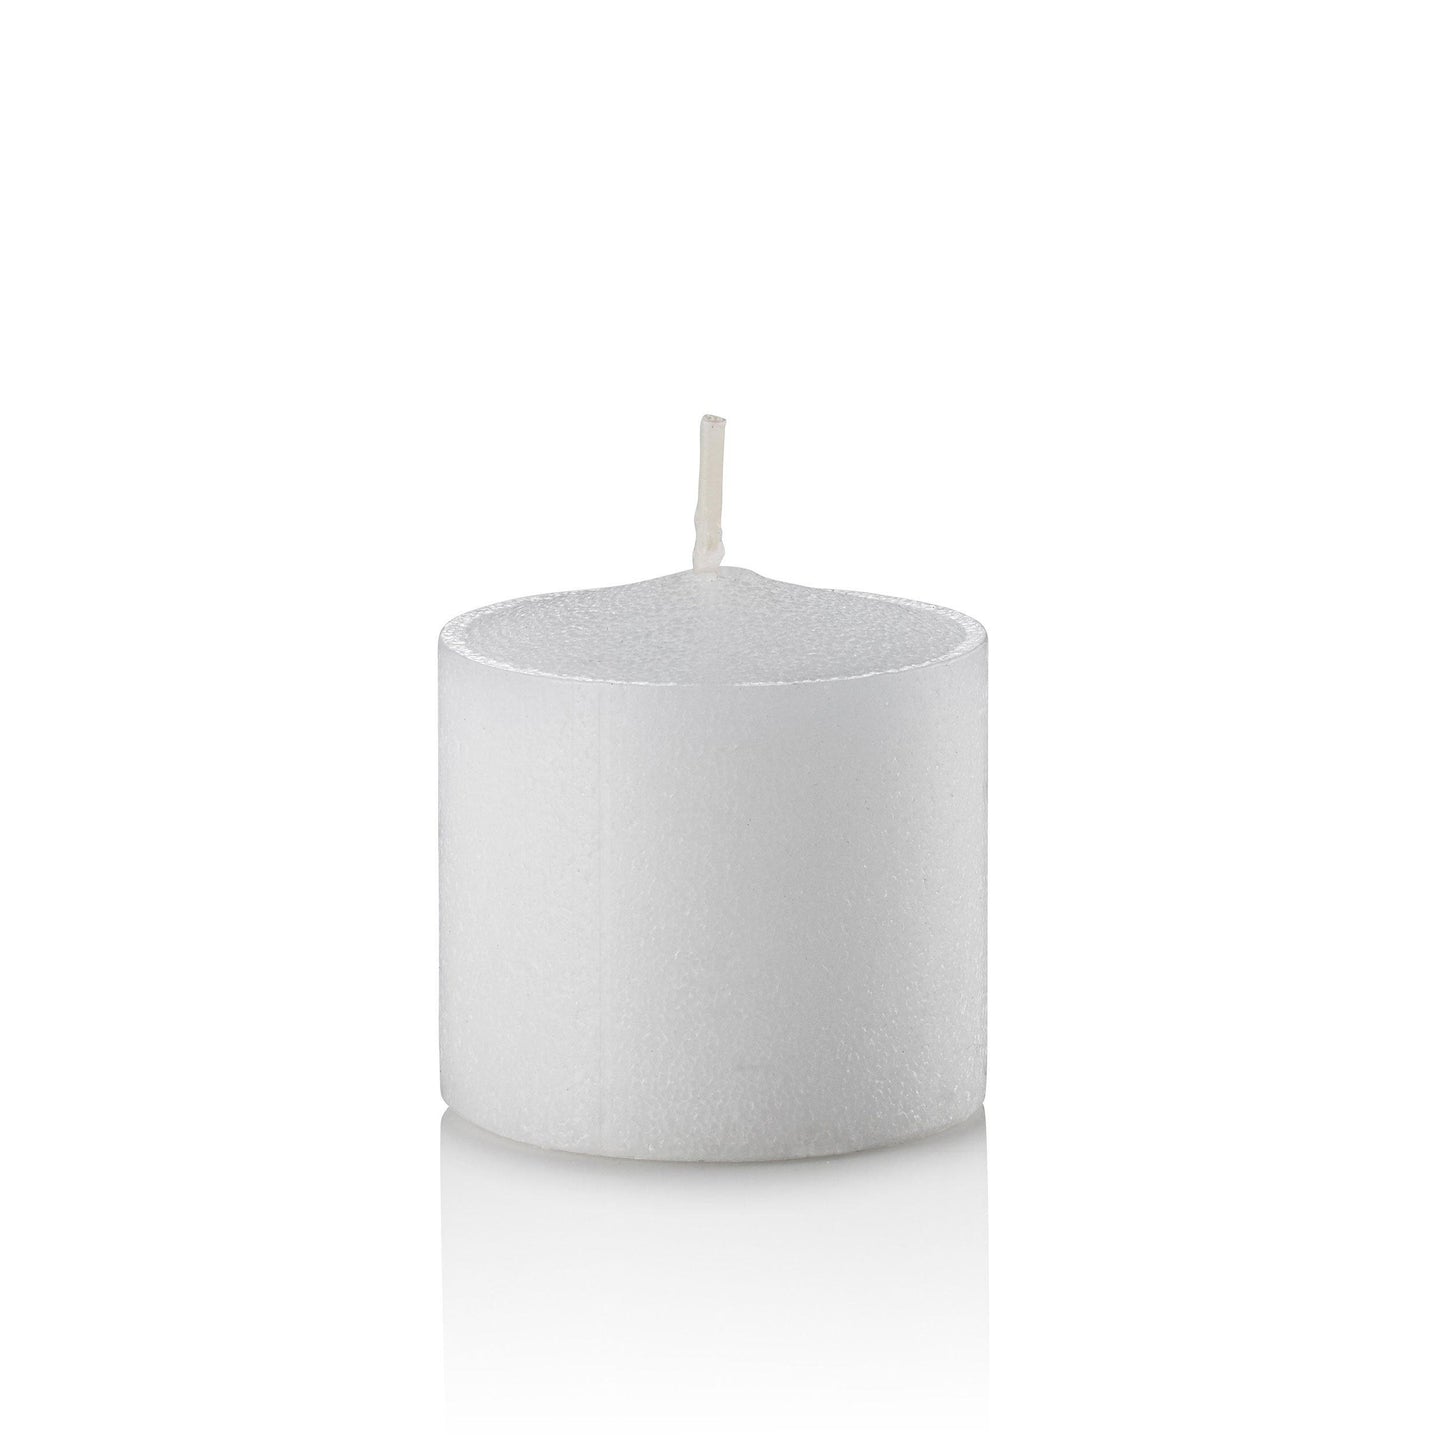 10 Hour Votive Candles, White, Unscented, Set of 288, 2 Gross-votive candles-TableTopLighting.com